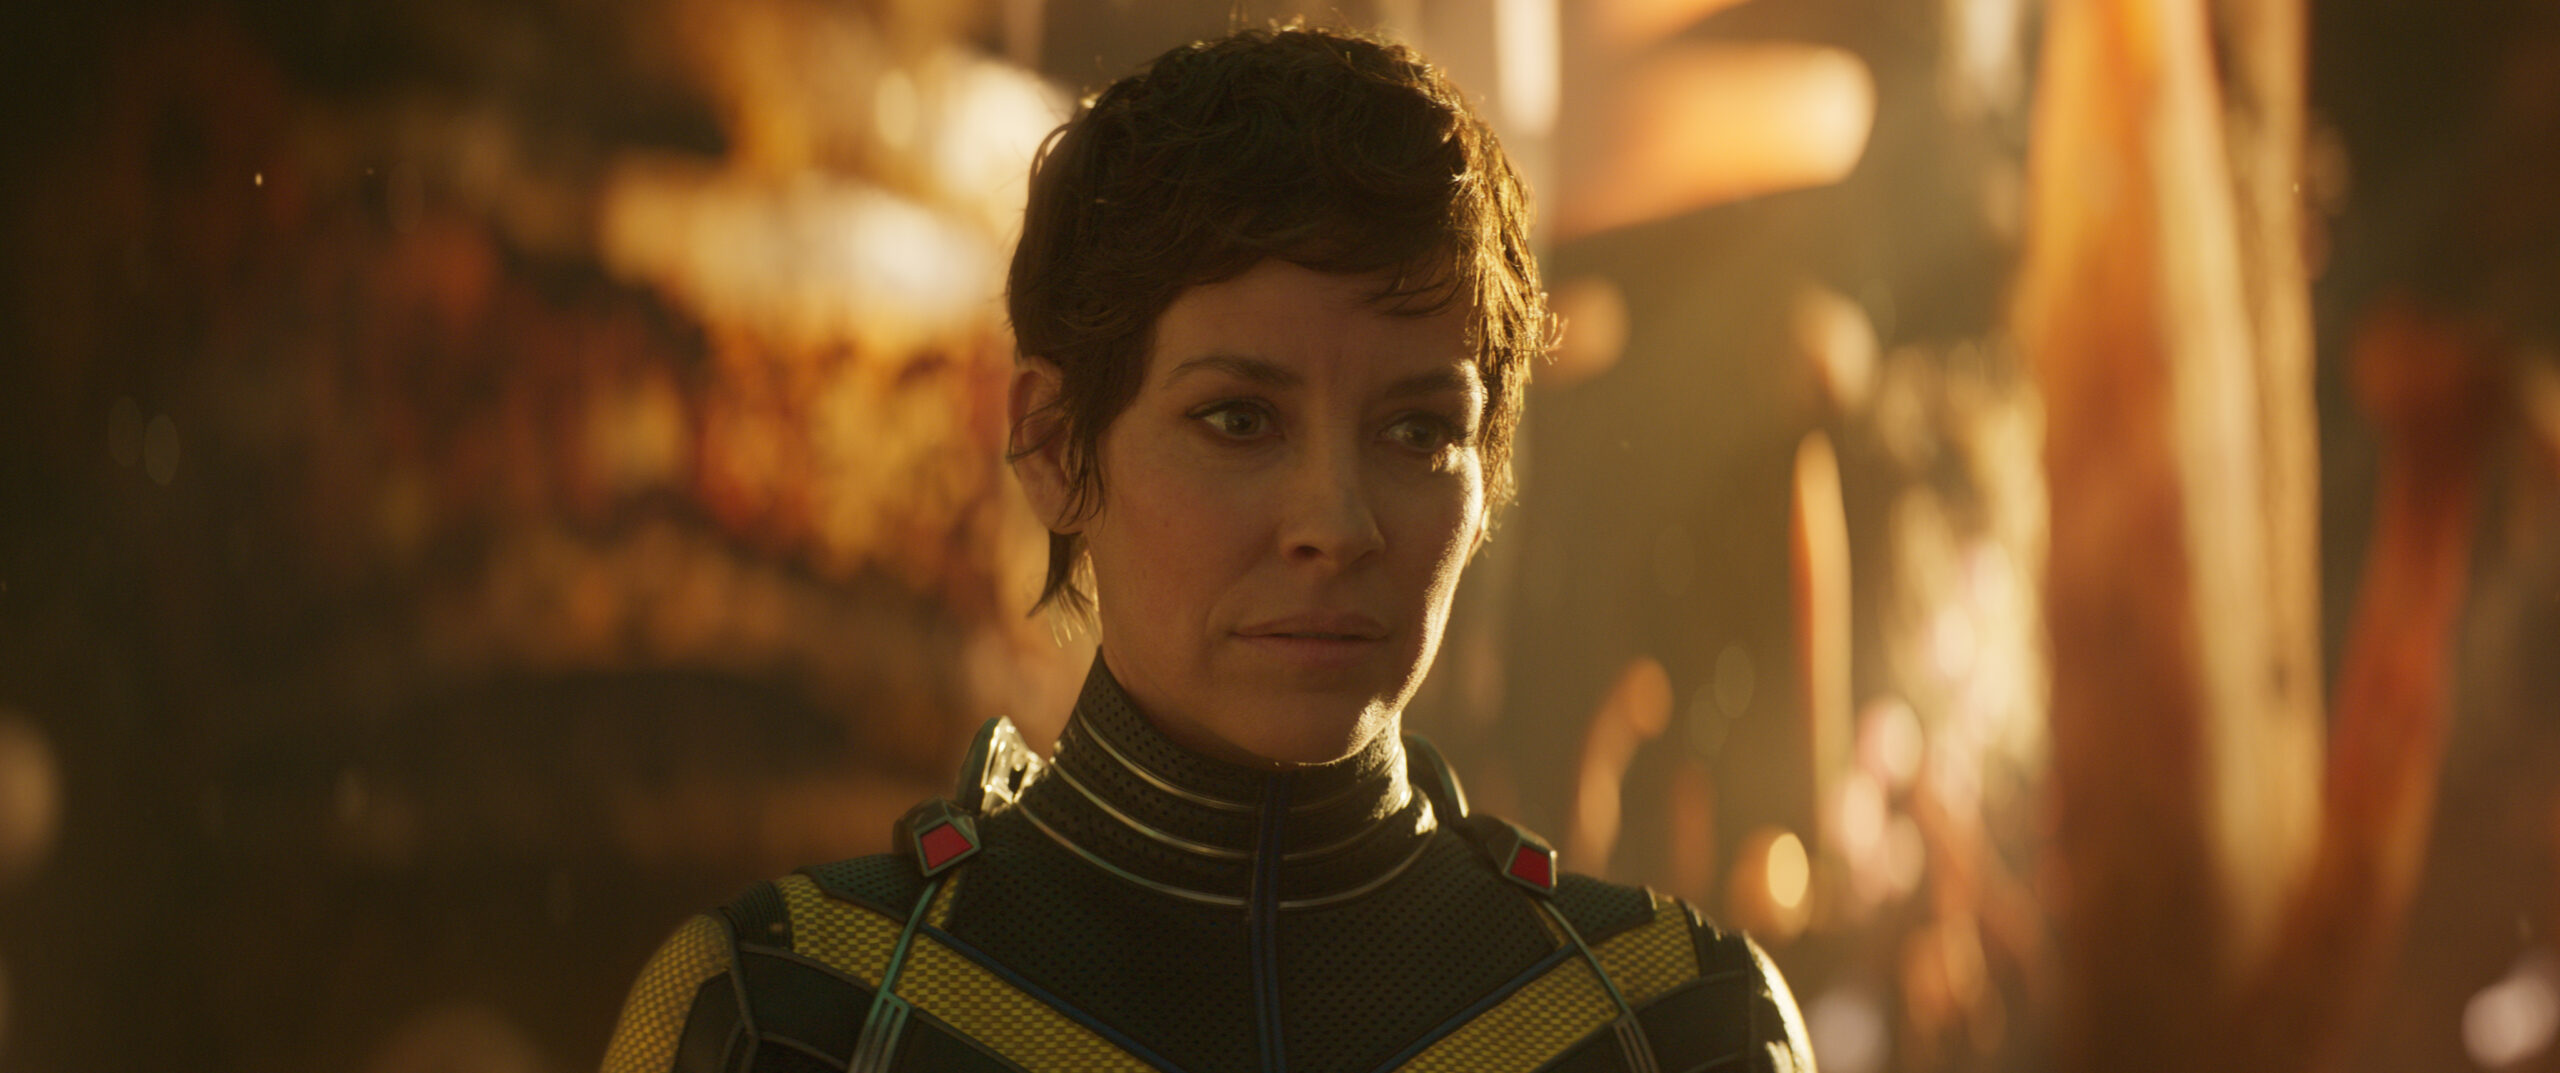 Evangeline Lilly as Hope van Dyne/Wasp in Marvel Studios' ANT-MAN AND THE WASP: QUANTUMANIA. Photo courtesy of Marvel Studios. © 2023 MARVEL.